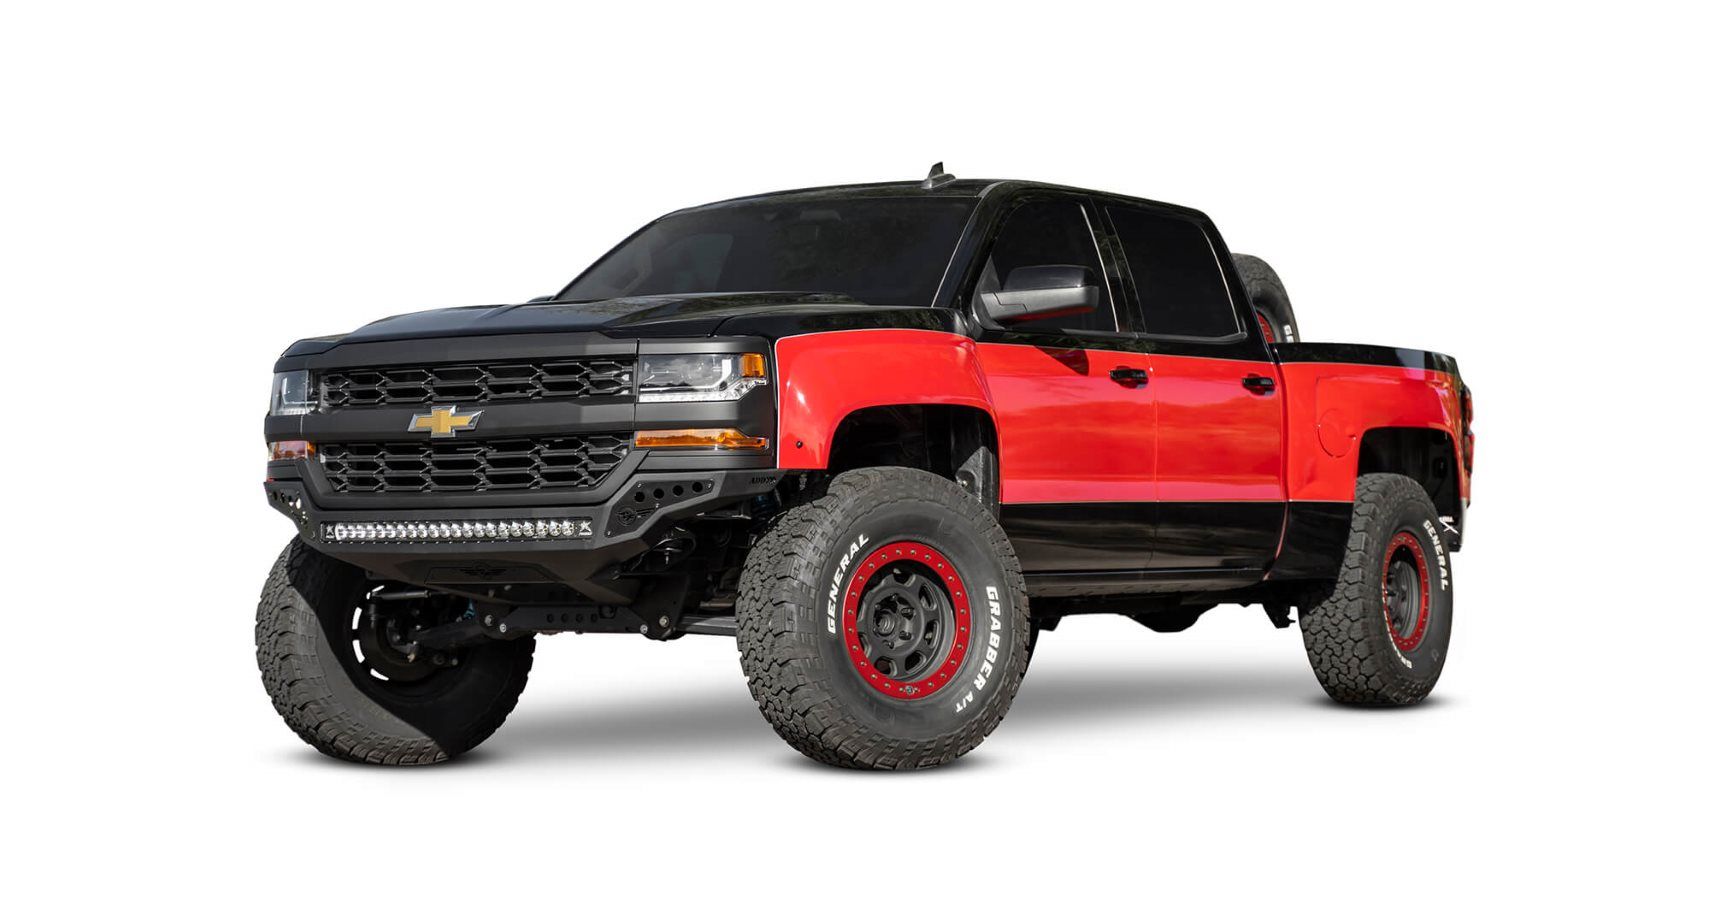 Check Out Addictive Desert Design's Rock Fighter Bumpers For Chevy & GMC